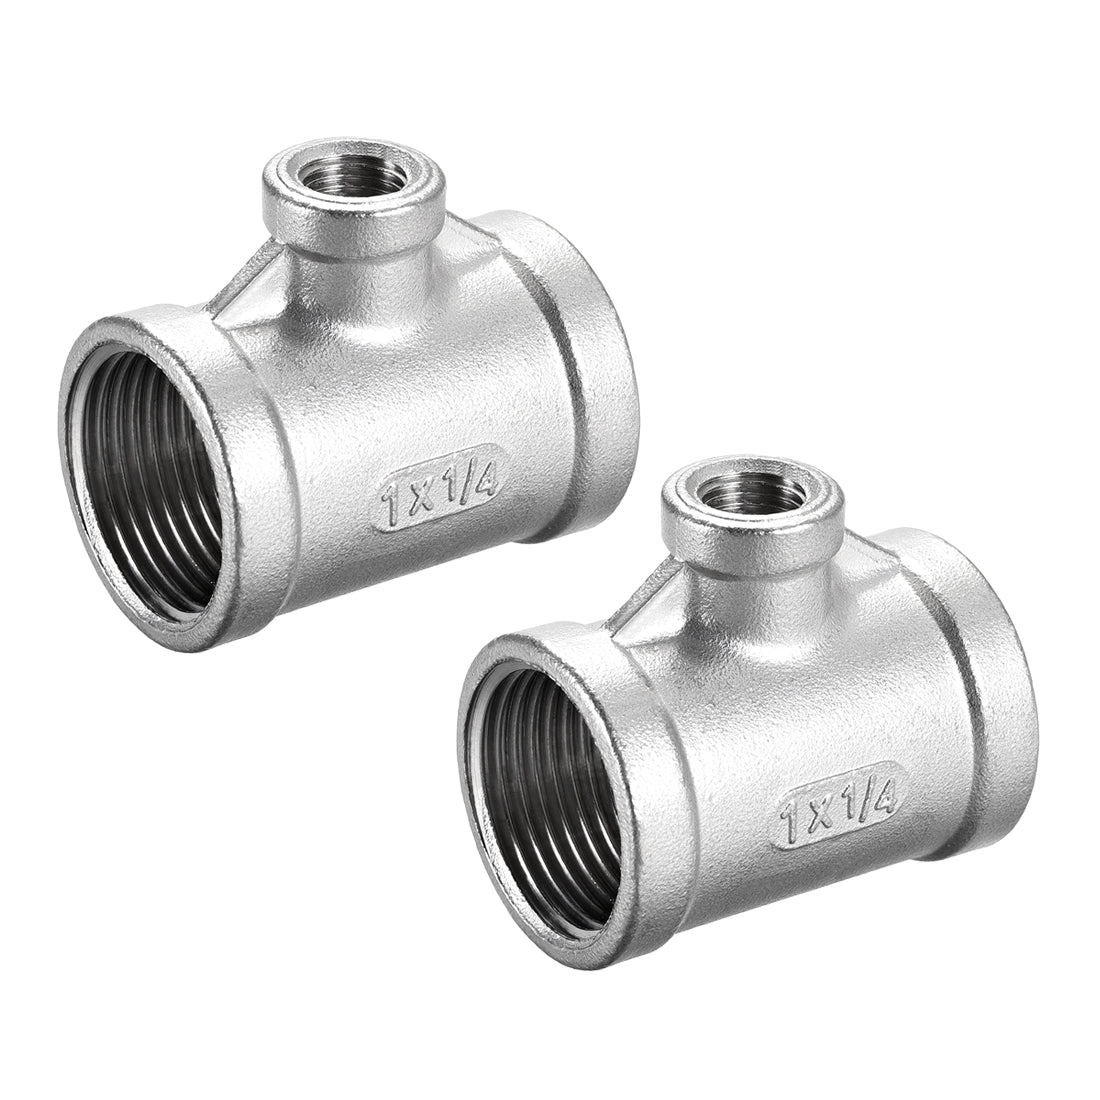 uxcell Uxcell Stainless Steel 304 Cast  Pipe Fitting 1 BSPT x 1/4 BSPT x 1 BSPT Female Tee Shaped Connector Coupler 2pcs